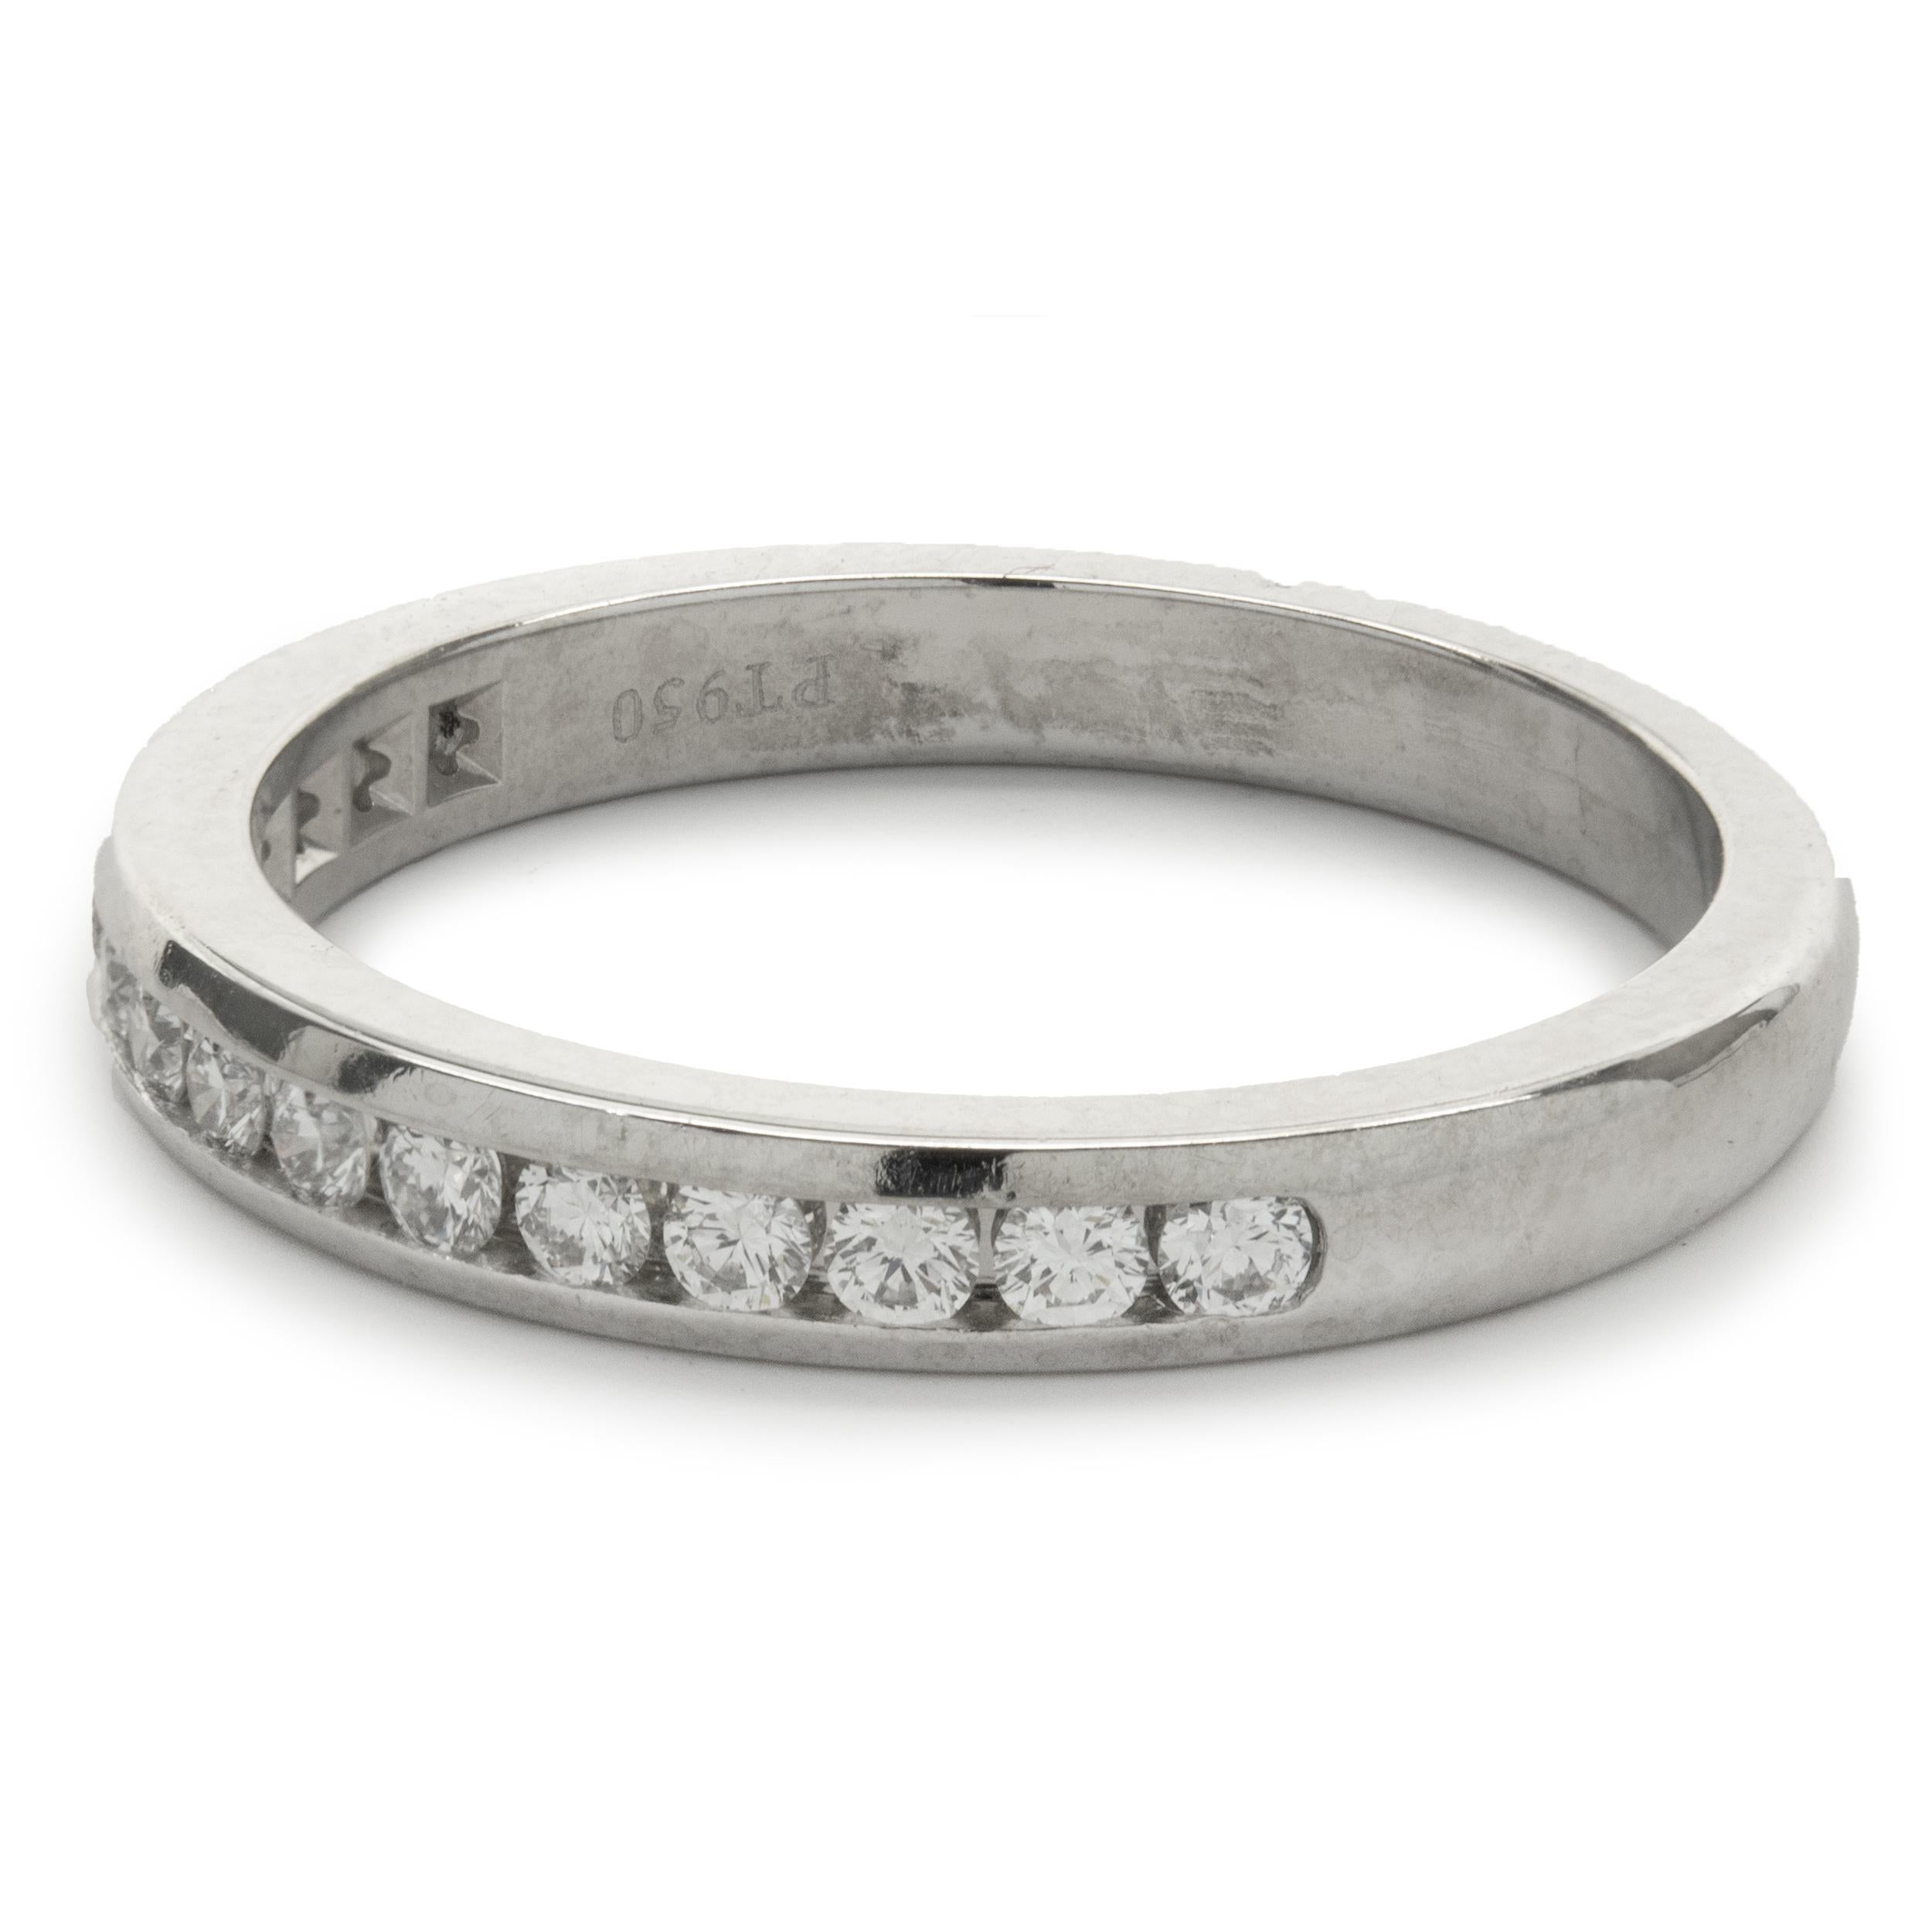 Designer: Tiffany & Co.
Material: Platinum
Diamond: 15 round brilliant cut = .30cttw
Color: F/G
Clarity: VS1-2
Dimensions: band measures 2.70mm wide
Size 6
Weight: 4.26 grams
